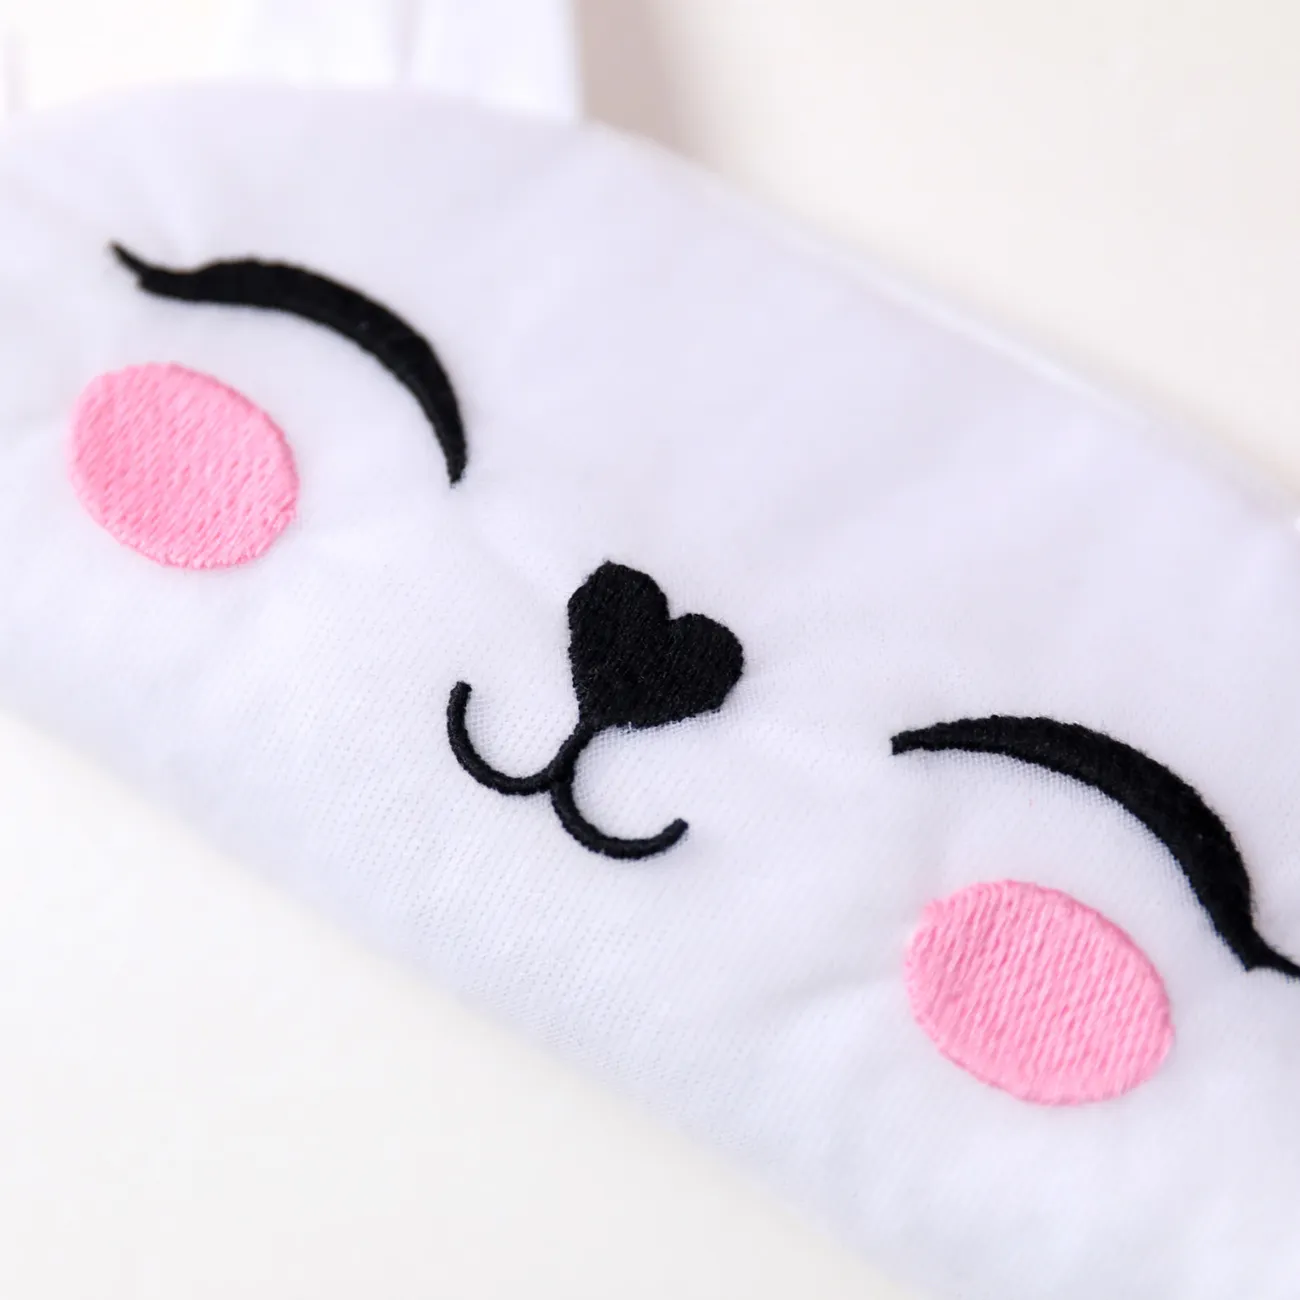 Go-Glow Light Up Pencil Case with Cat Pattern Including Controller (Battery Inside) White big image 1